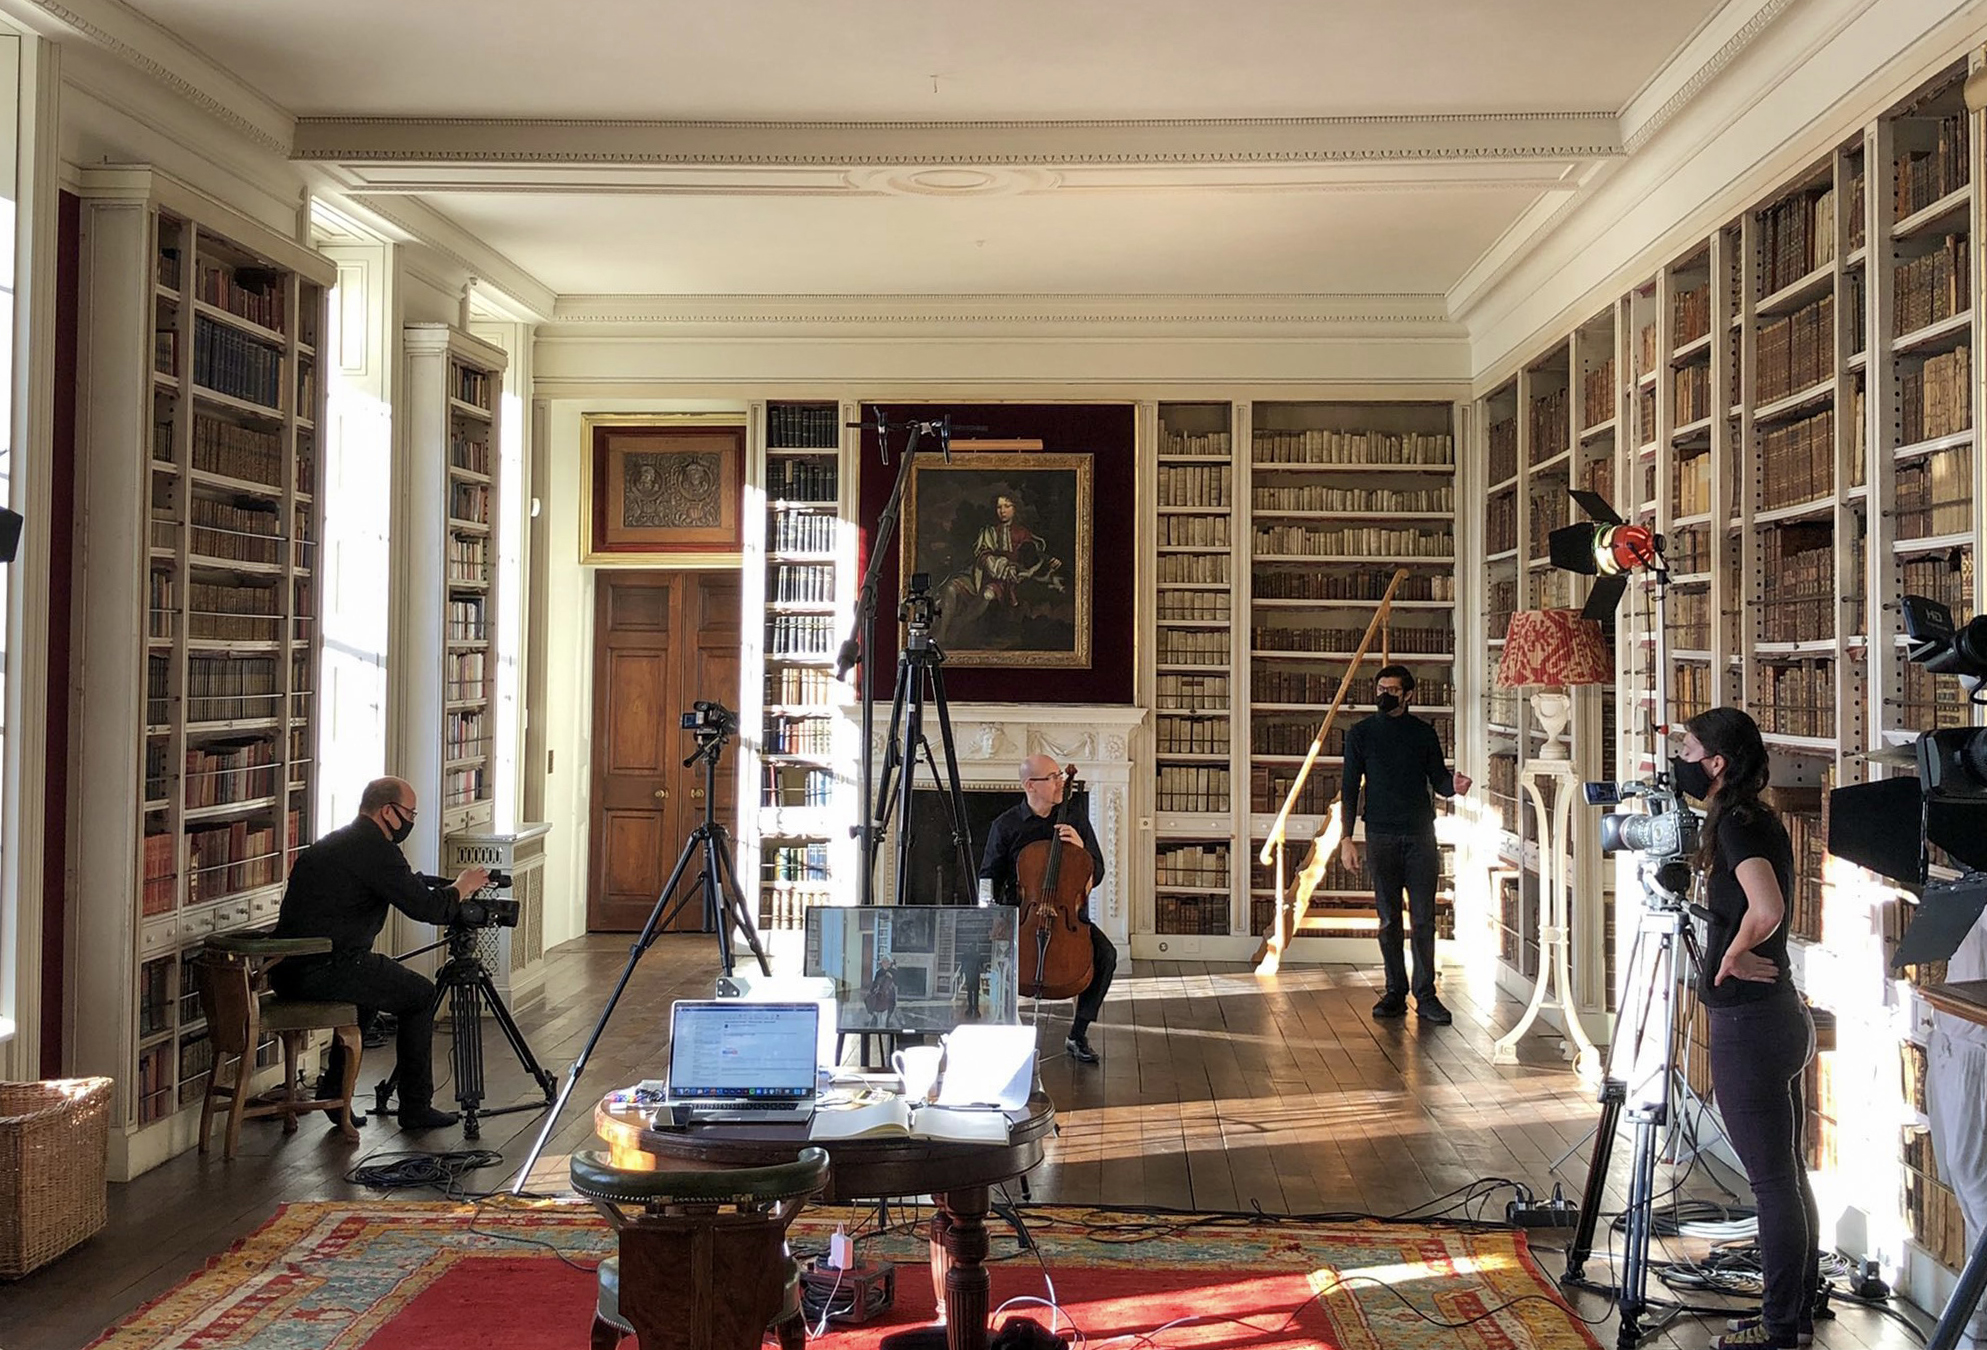 A film crew filming a cello performance in a historic house